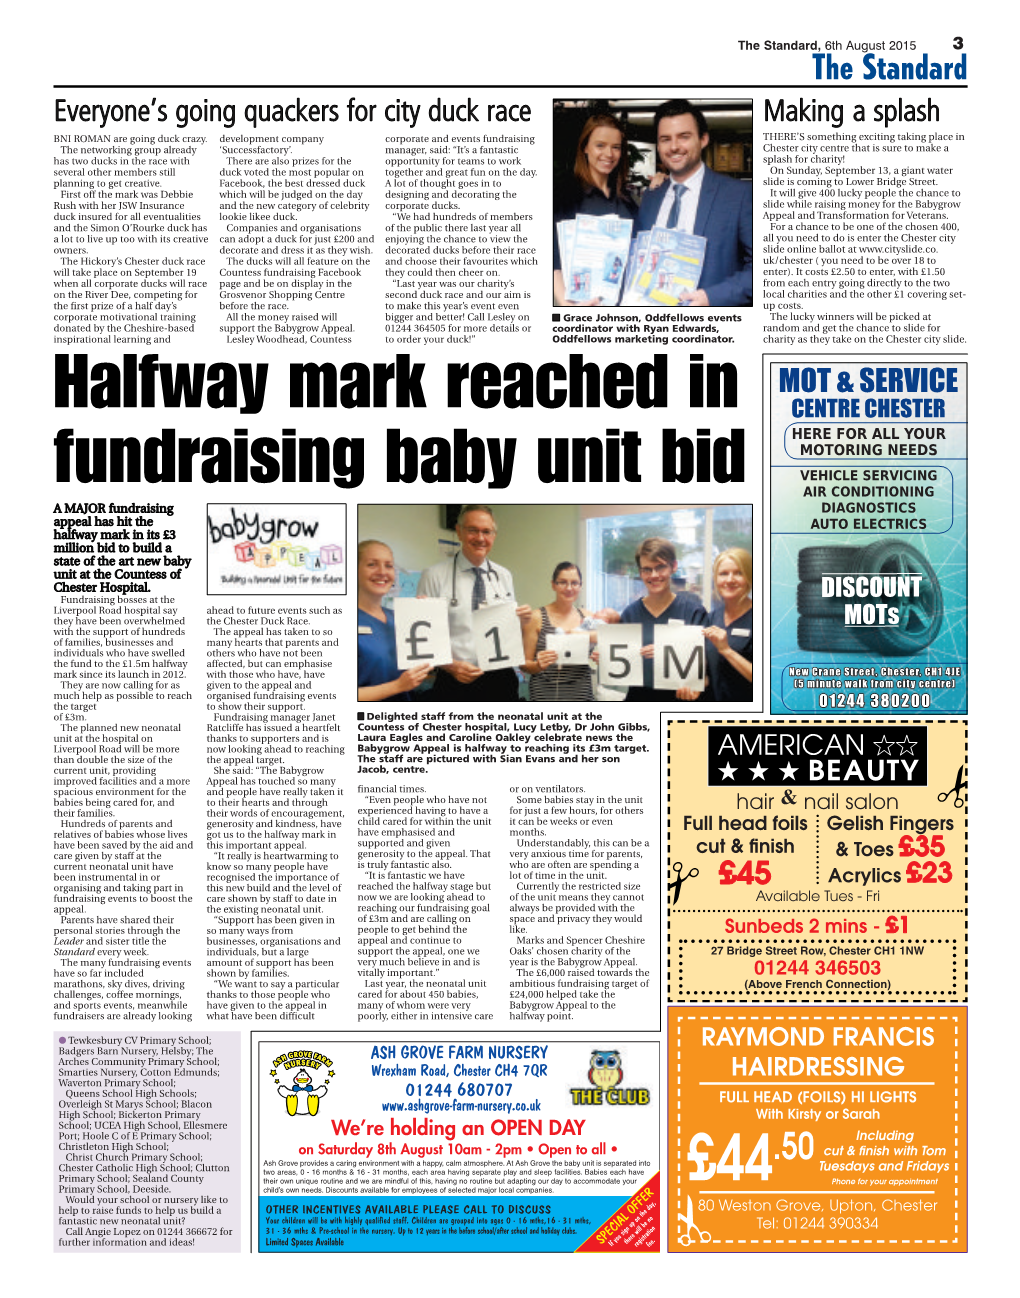 Halfway Mark Reached in Fundraising Baby Unit